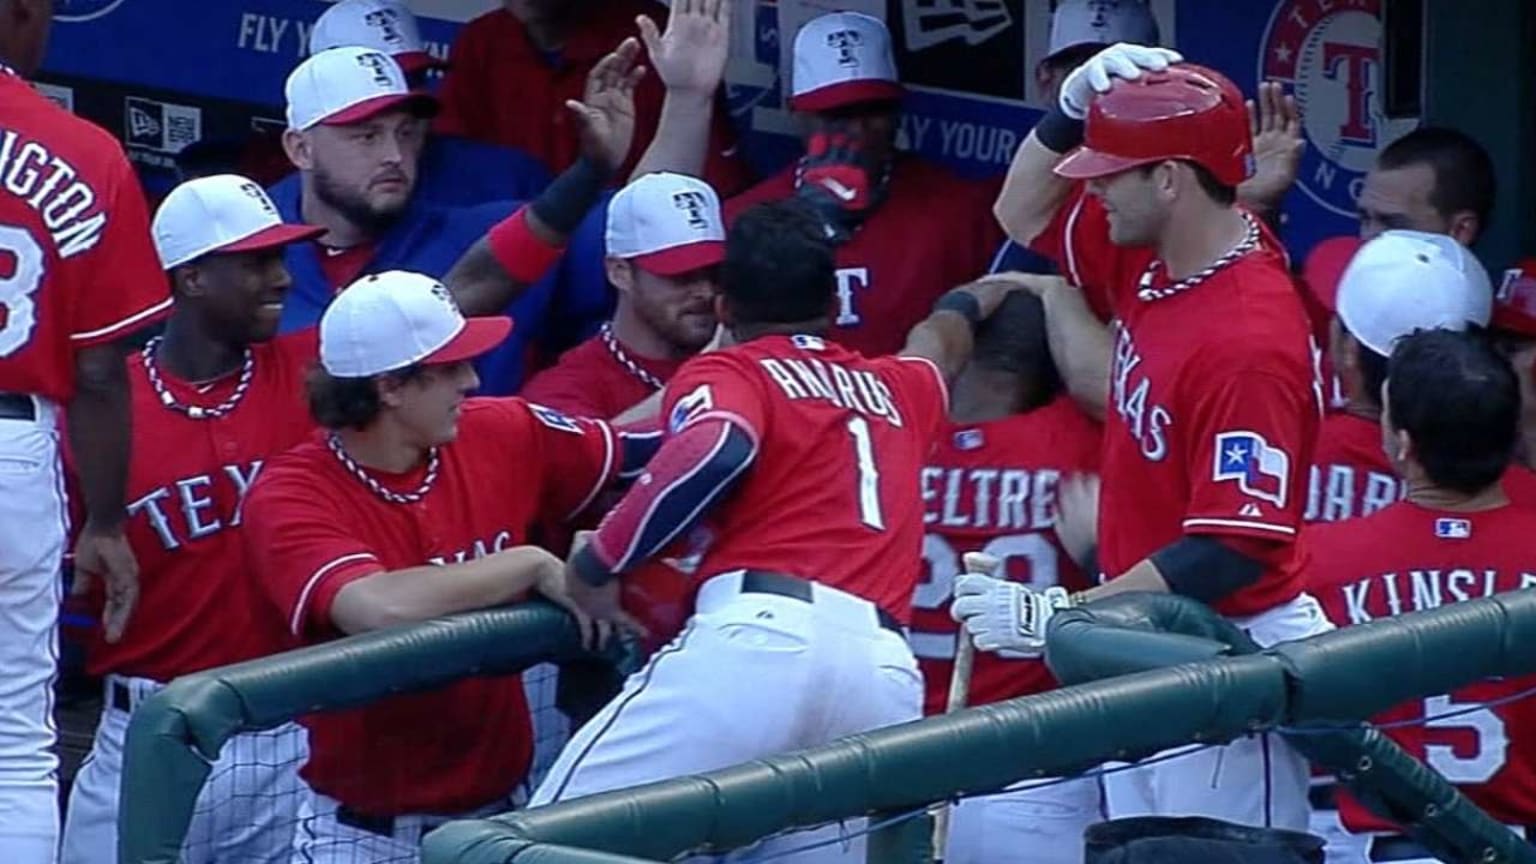 Adrian Beltre hates when people rub his head (GIFs, videos) - Sports  Illustrated